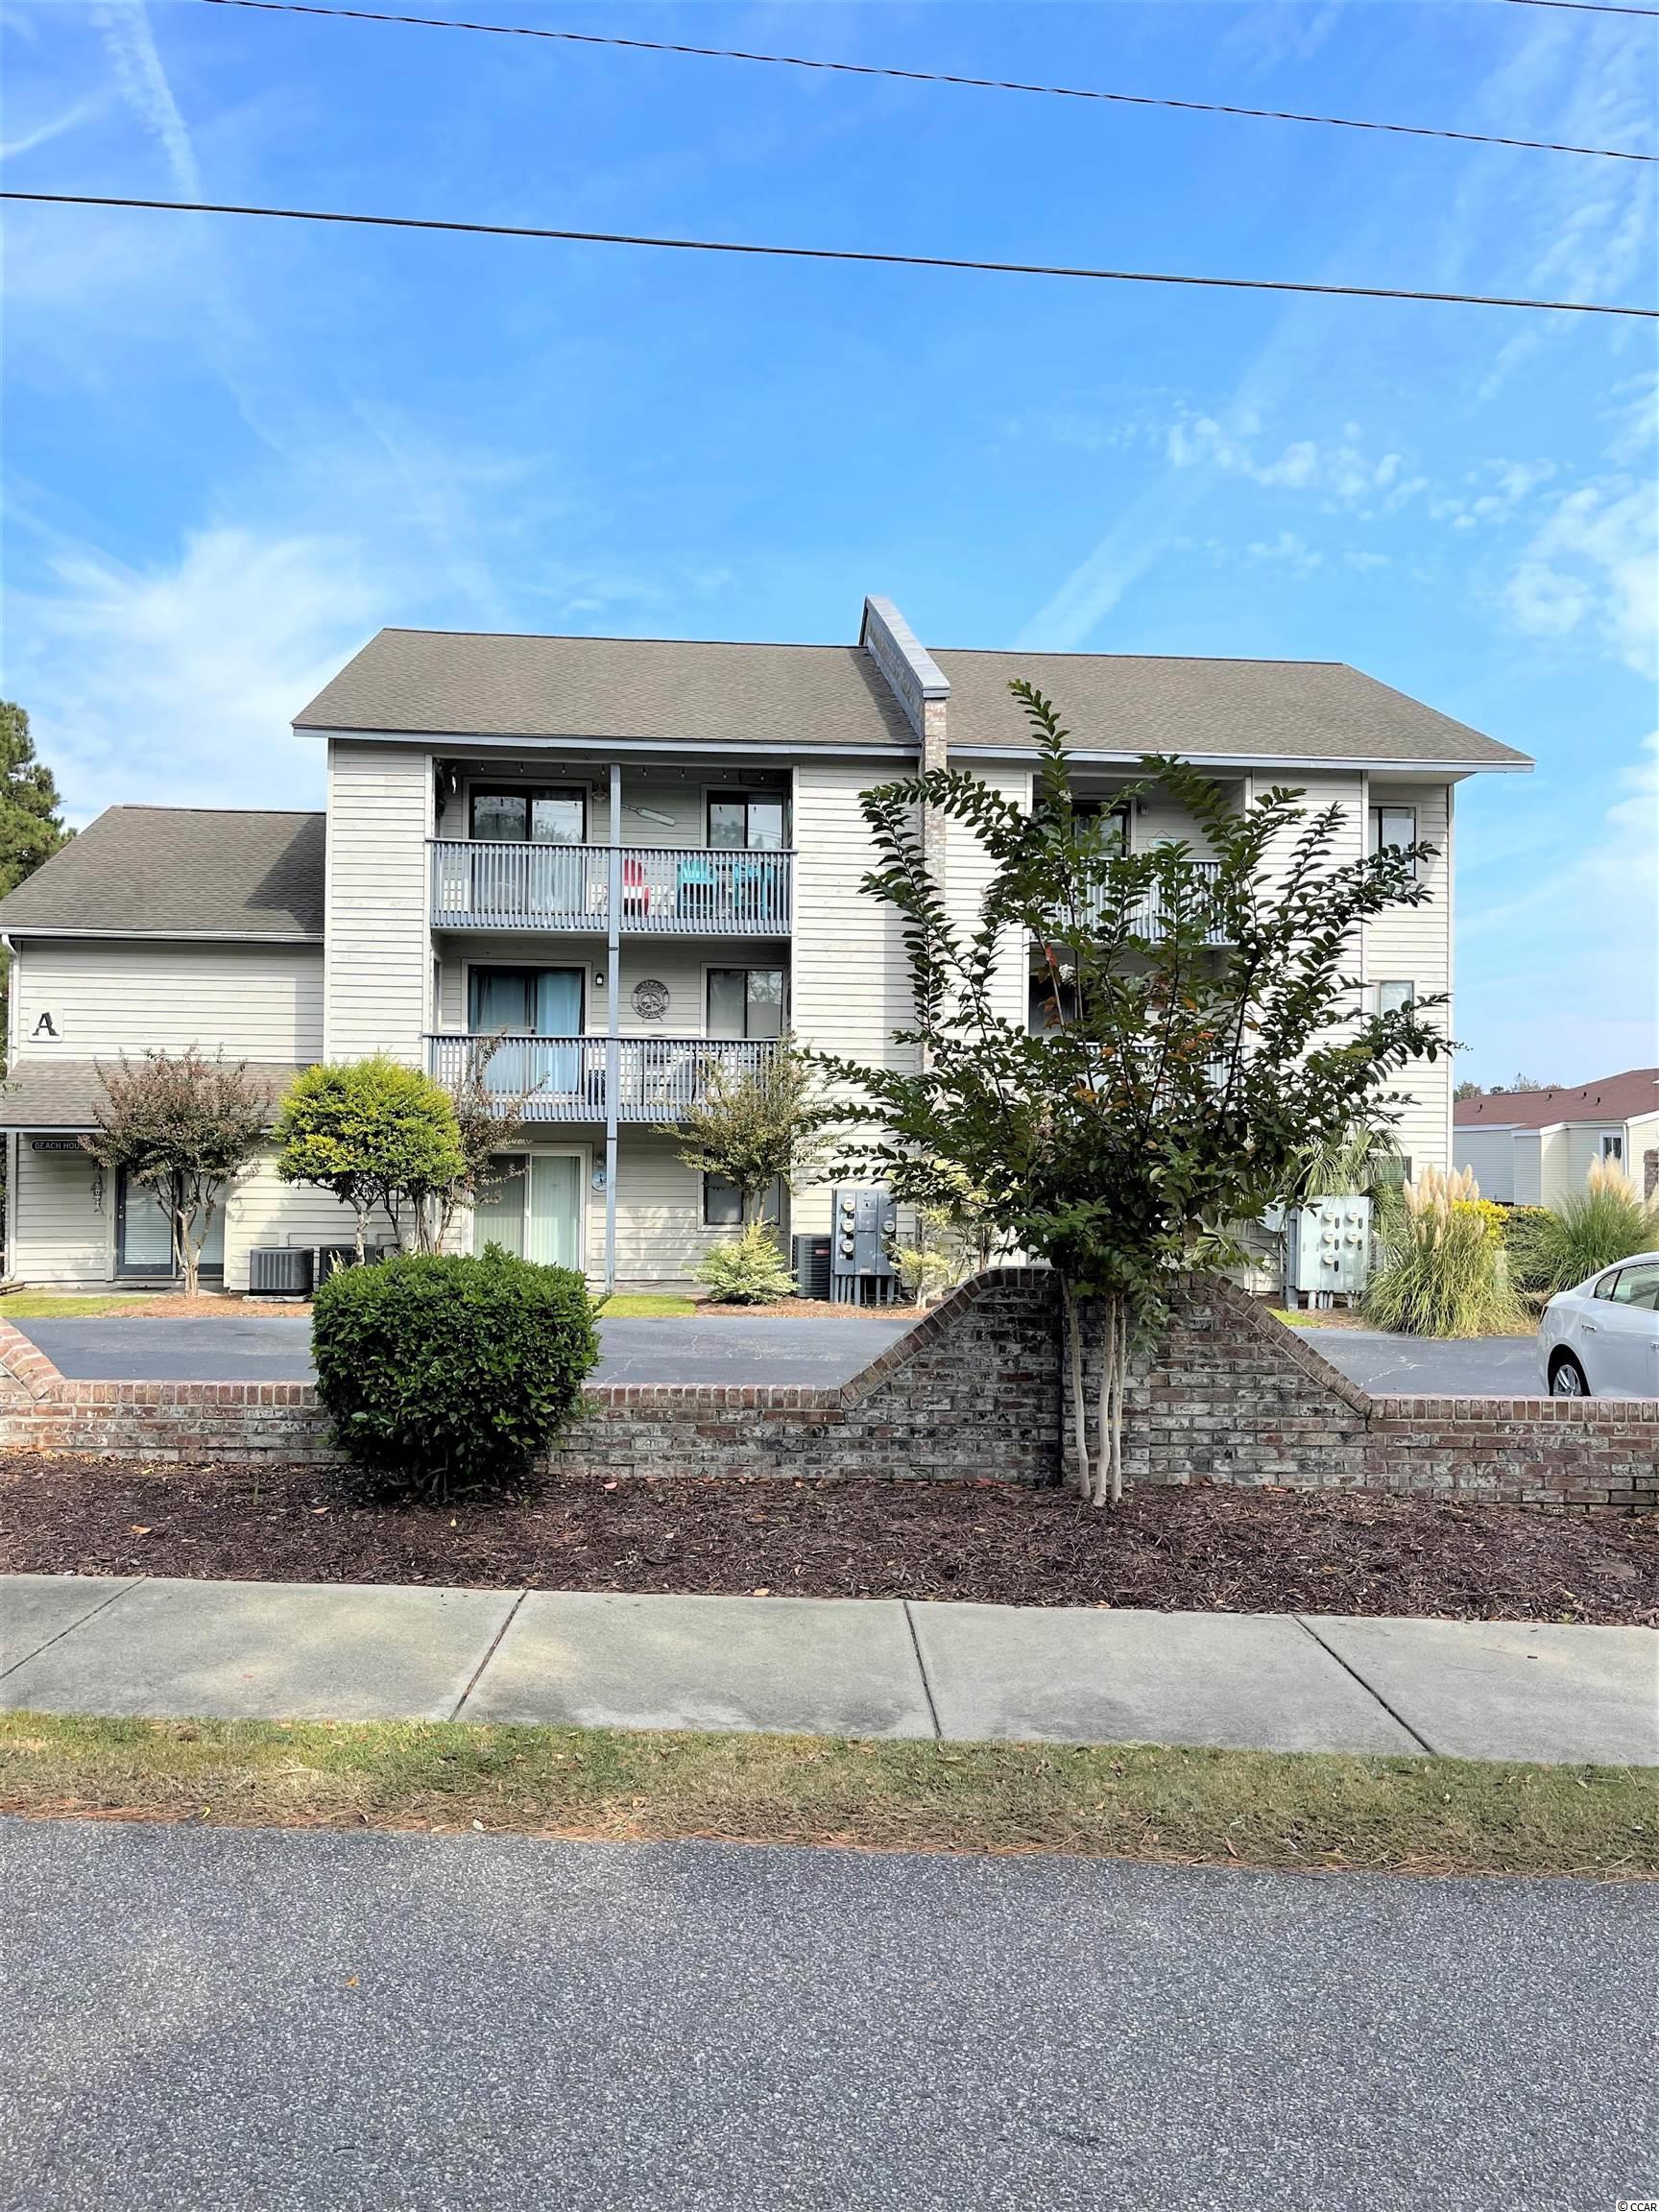 816 9th Ave. S UNIT 201-A North Myrtle Beach, SC 29582